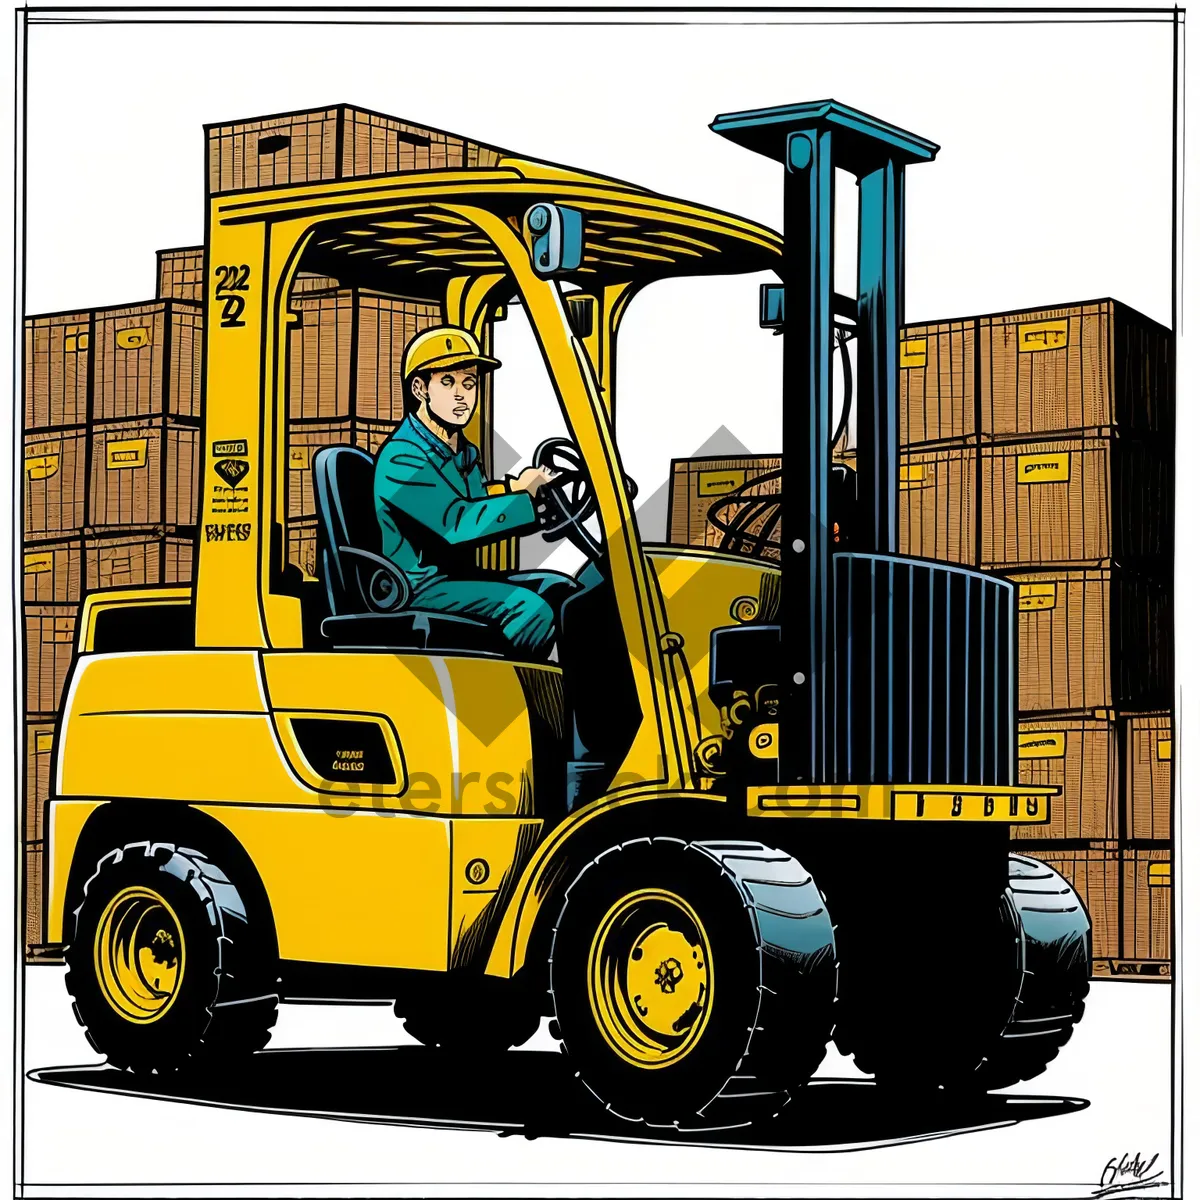 Picture of Industrial Forklift Truck: Efficient Heavy Equipment for Cargo Transport